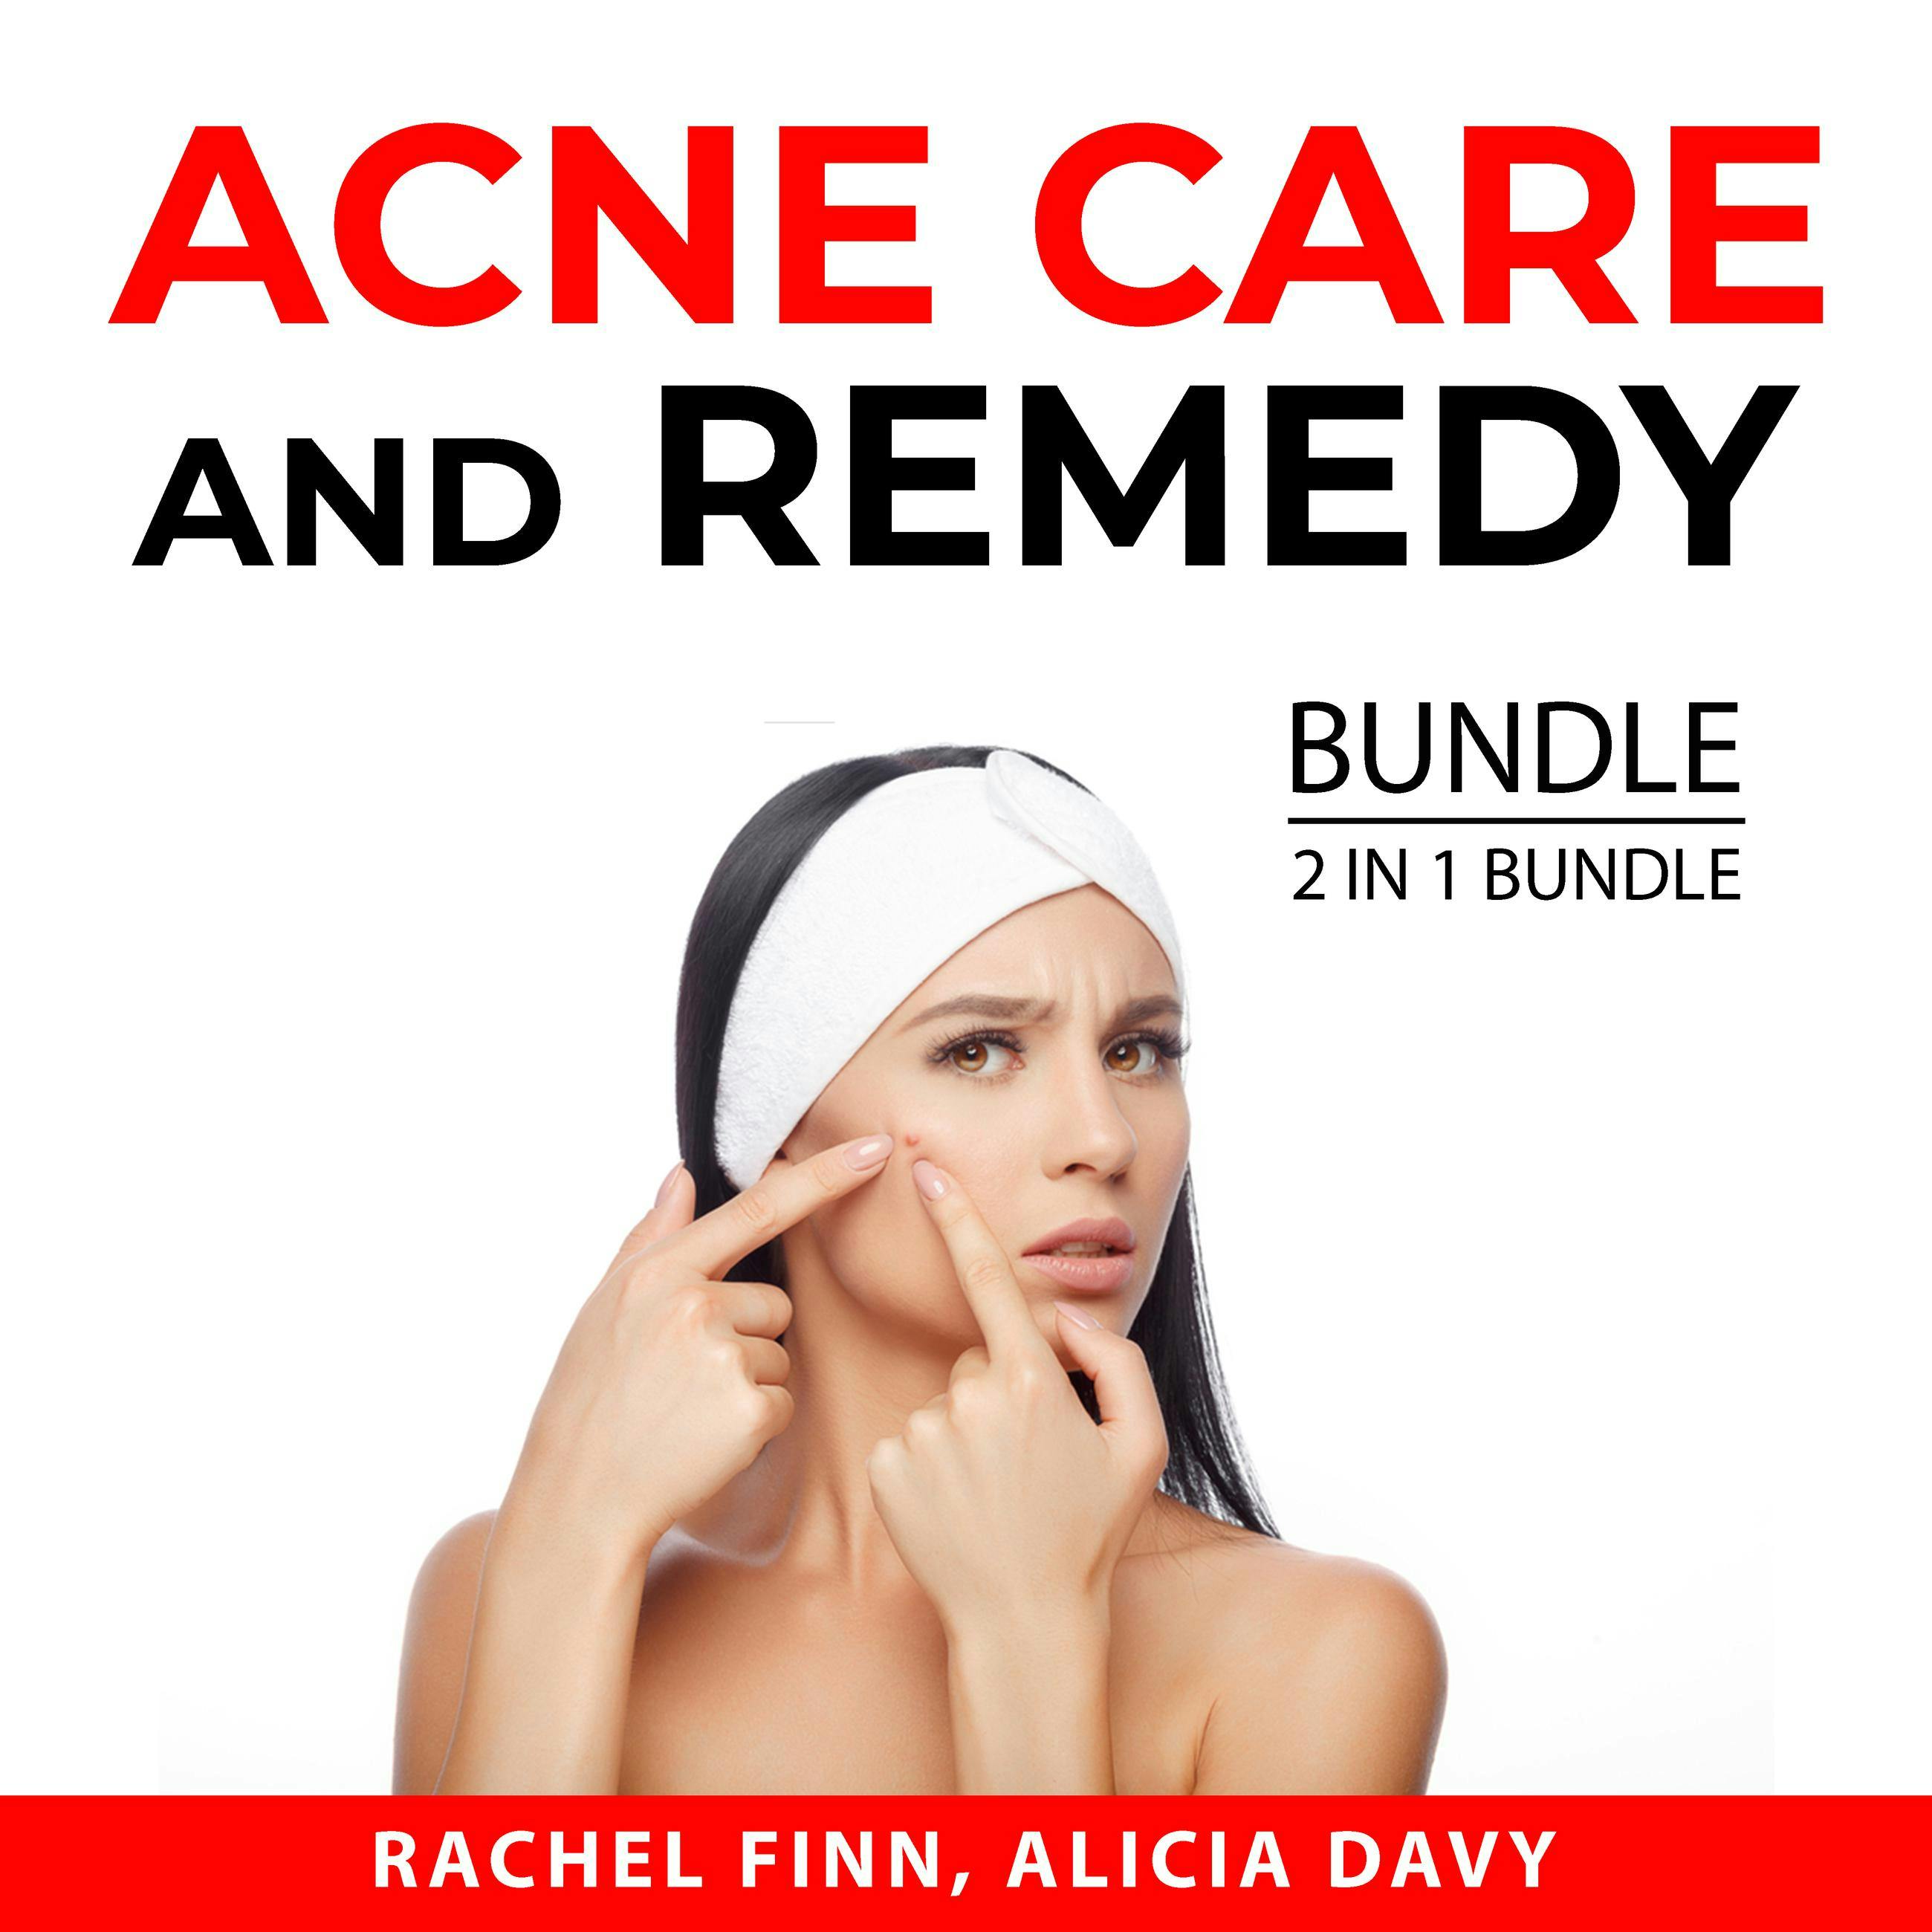 Acne Care and Remedy Bundle, 2 in 1 Bundle: Acne Cure and Get Rid of Acne - Rachel Finn, Alicia Davy